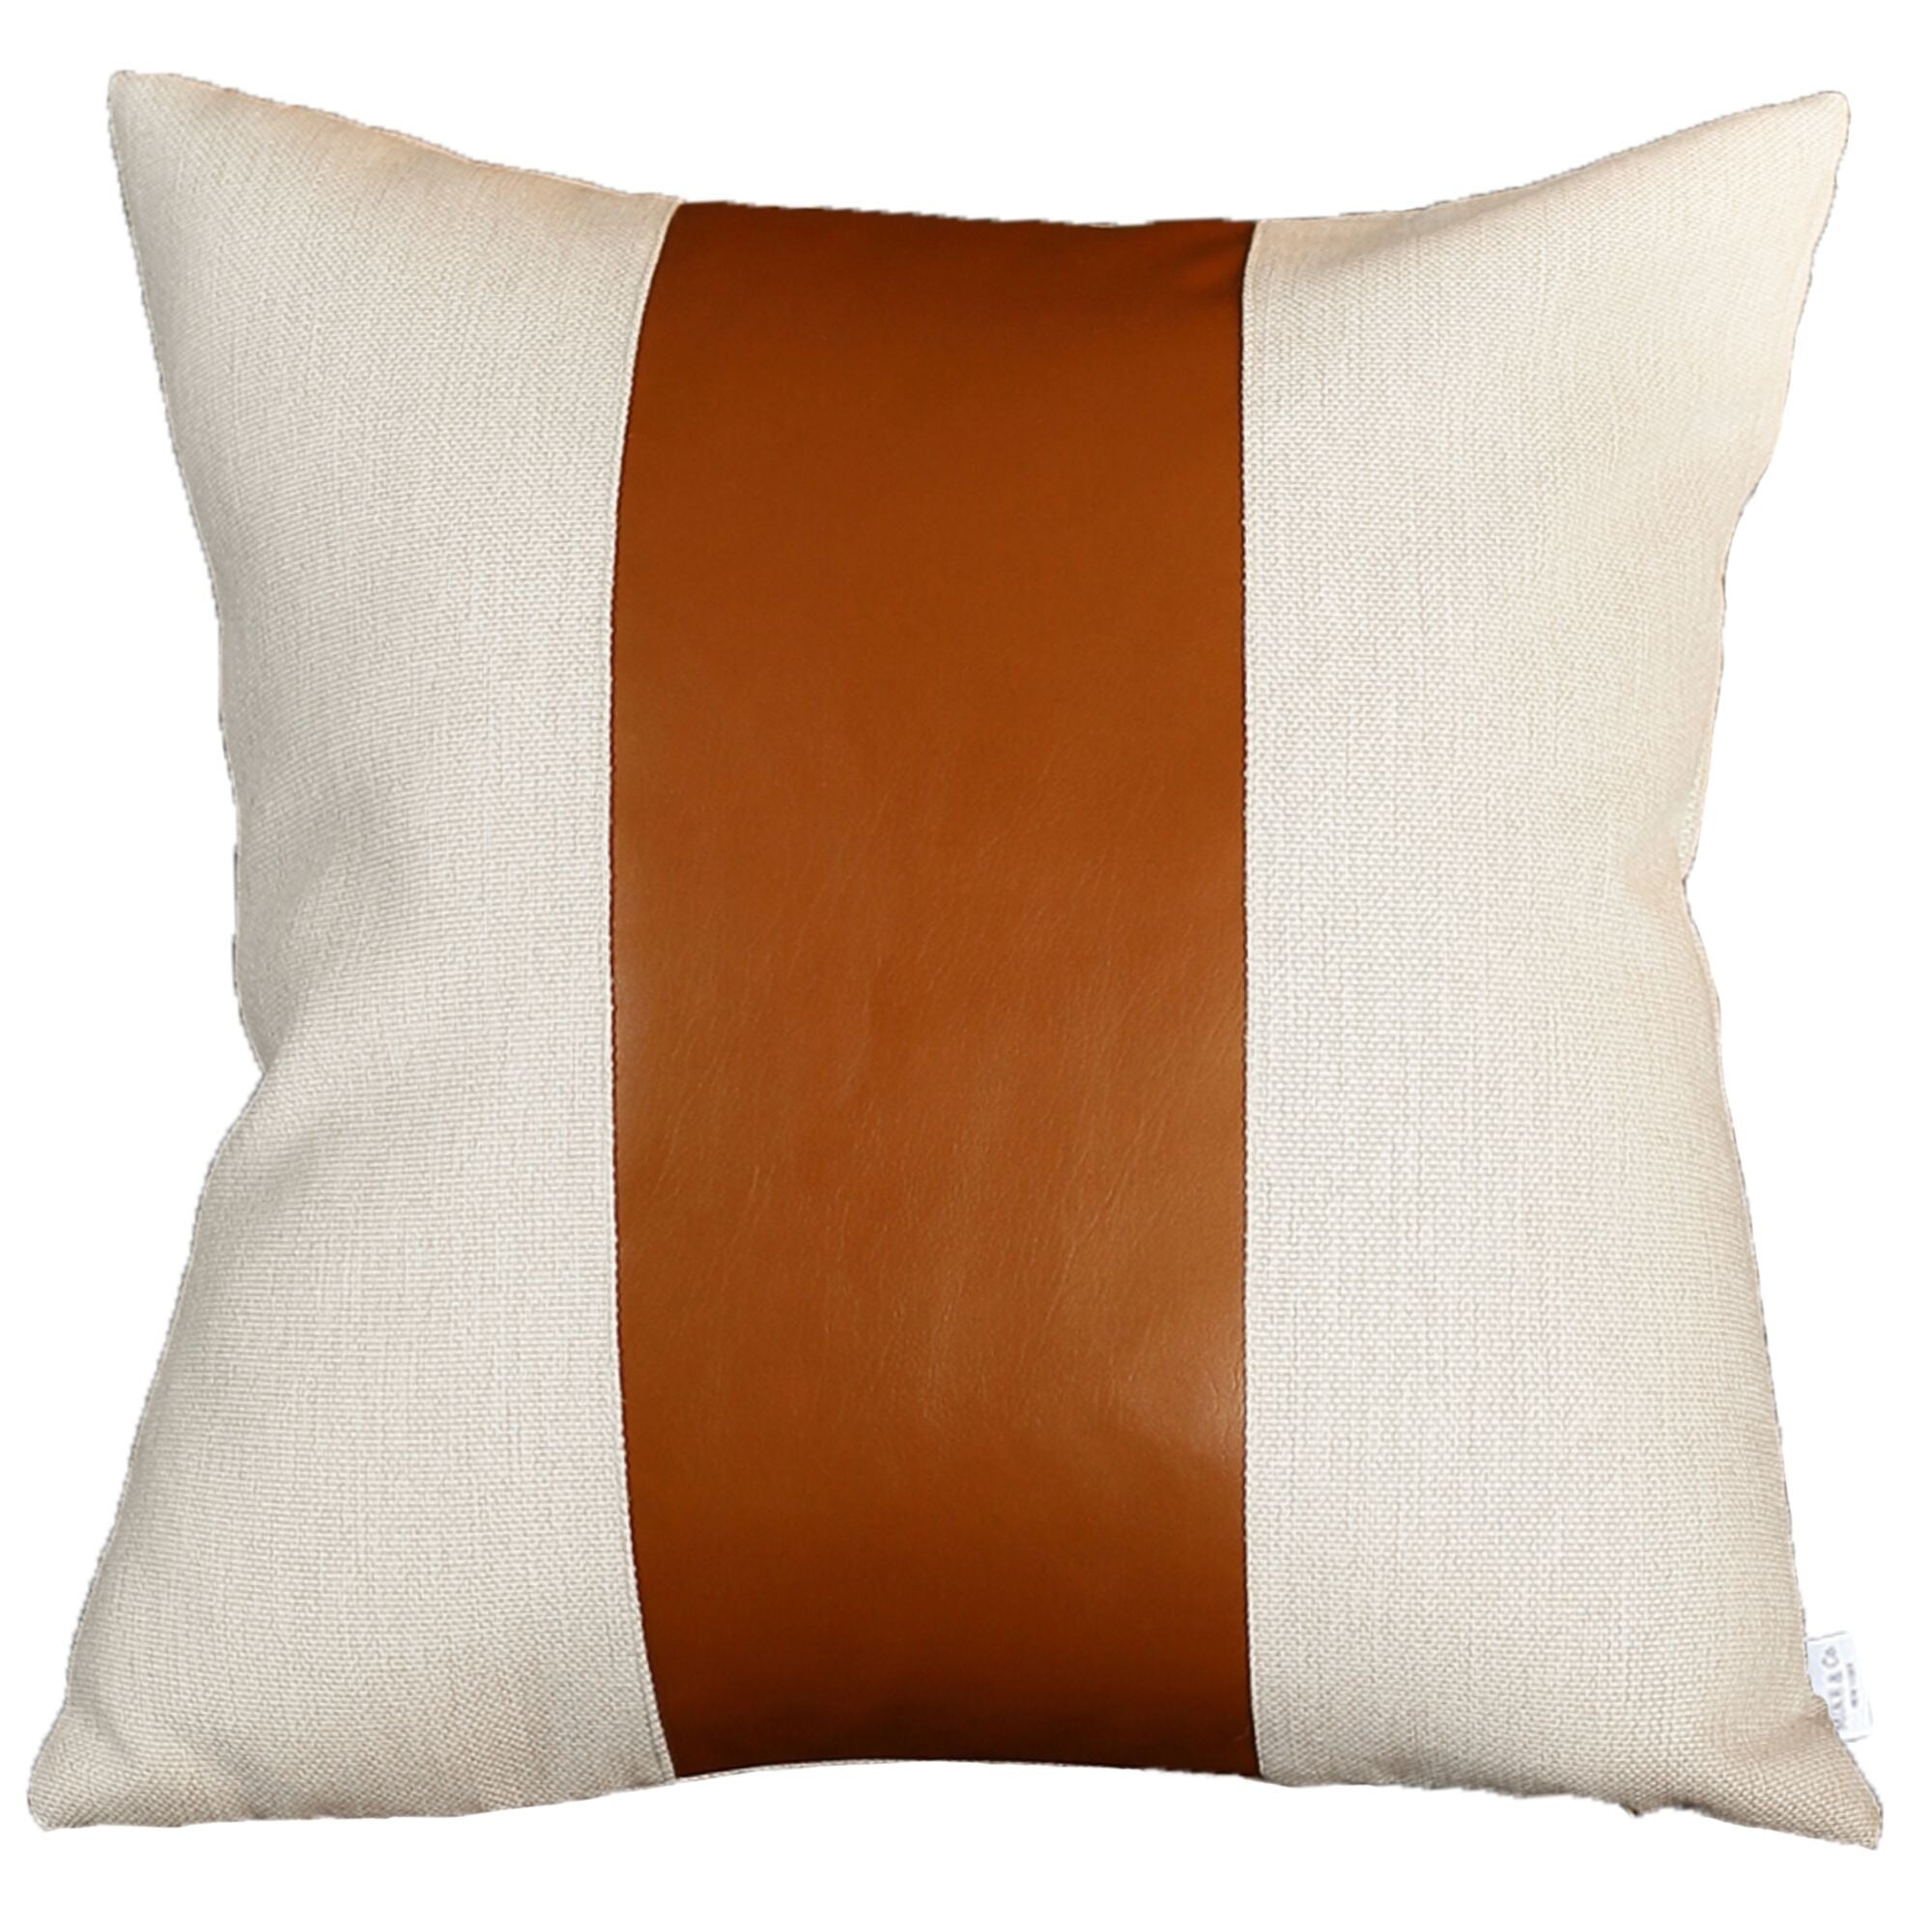 https://ak1.ostkcdn.com/images/products/is/images/direct/c554f2aa1cccdb04a0f274b4425160995896b9b2/Bohemian-Vegan-Faux-Leather-Detailed-Throw-Pillows.jpg